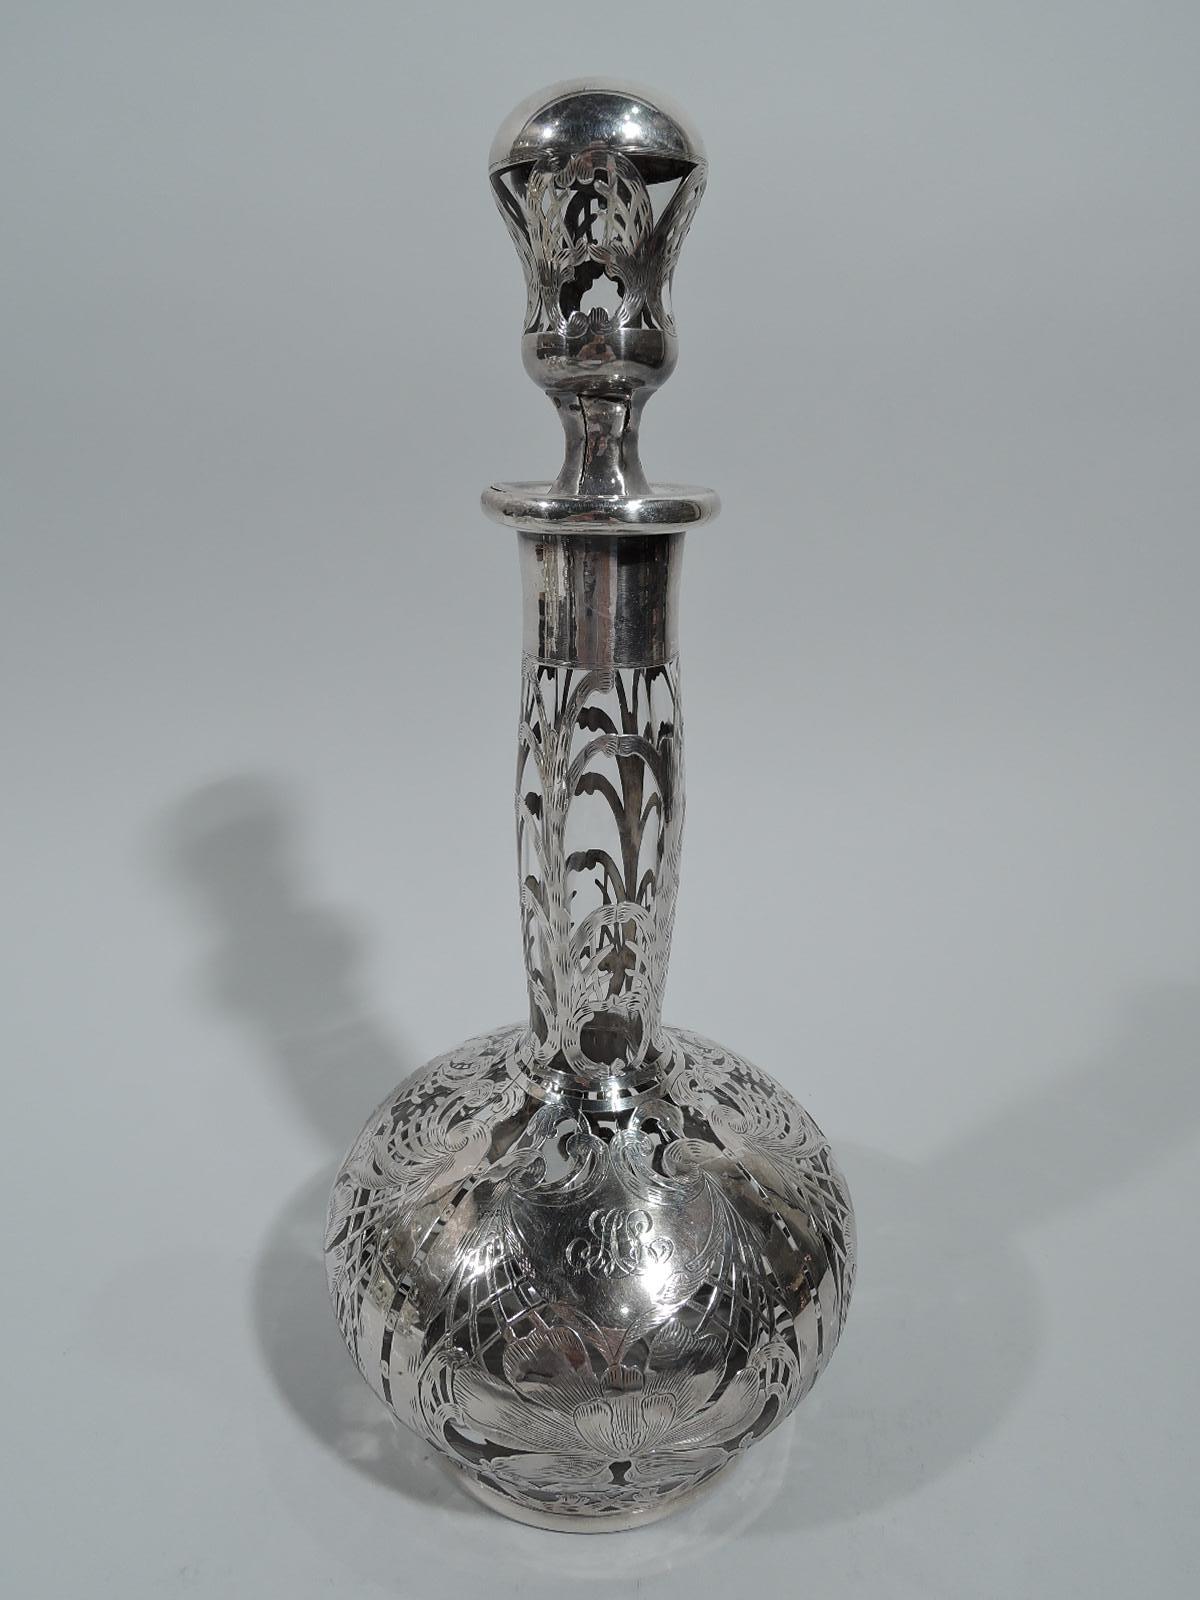 Tall turn of the century Art Nouveau glass decanter with engraved silver overlay. Globular bowl with cylindrical neck and everted rim. Stopper concave with faceted neck. Dense overlay. On bowl are flower heads, entwined scrolls, and trellis between